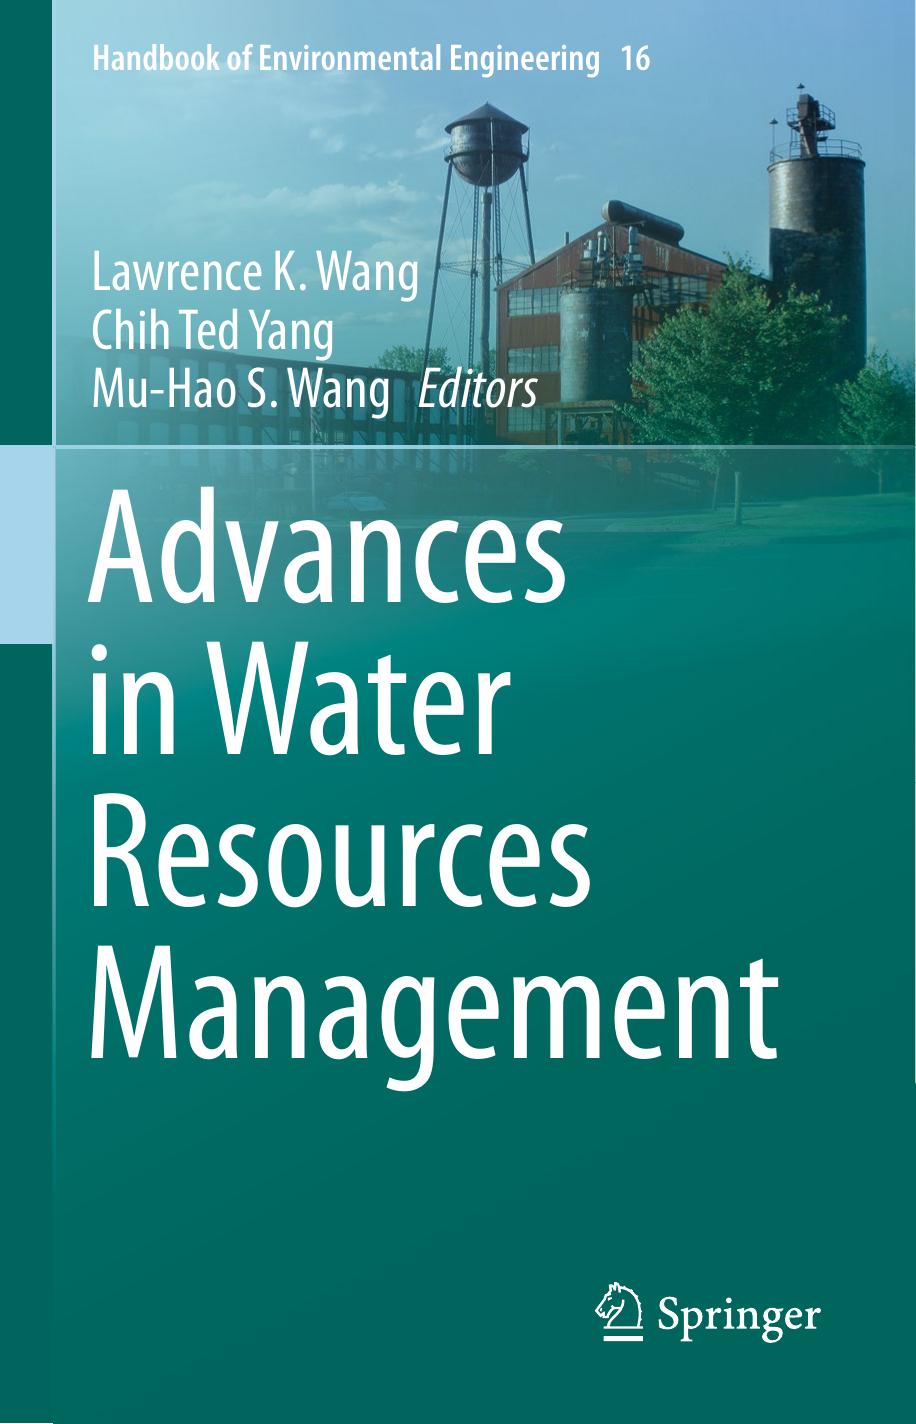 Advances in Water Resources Management 2016